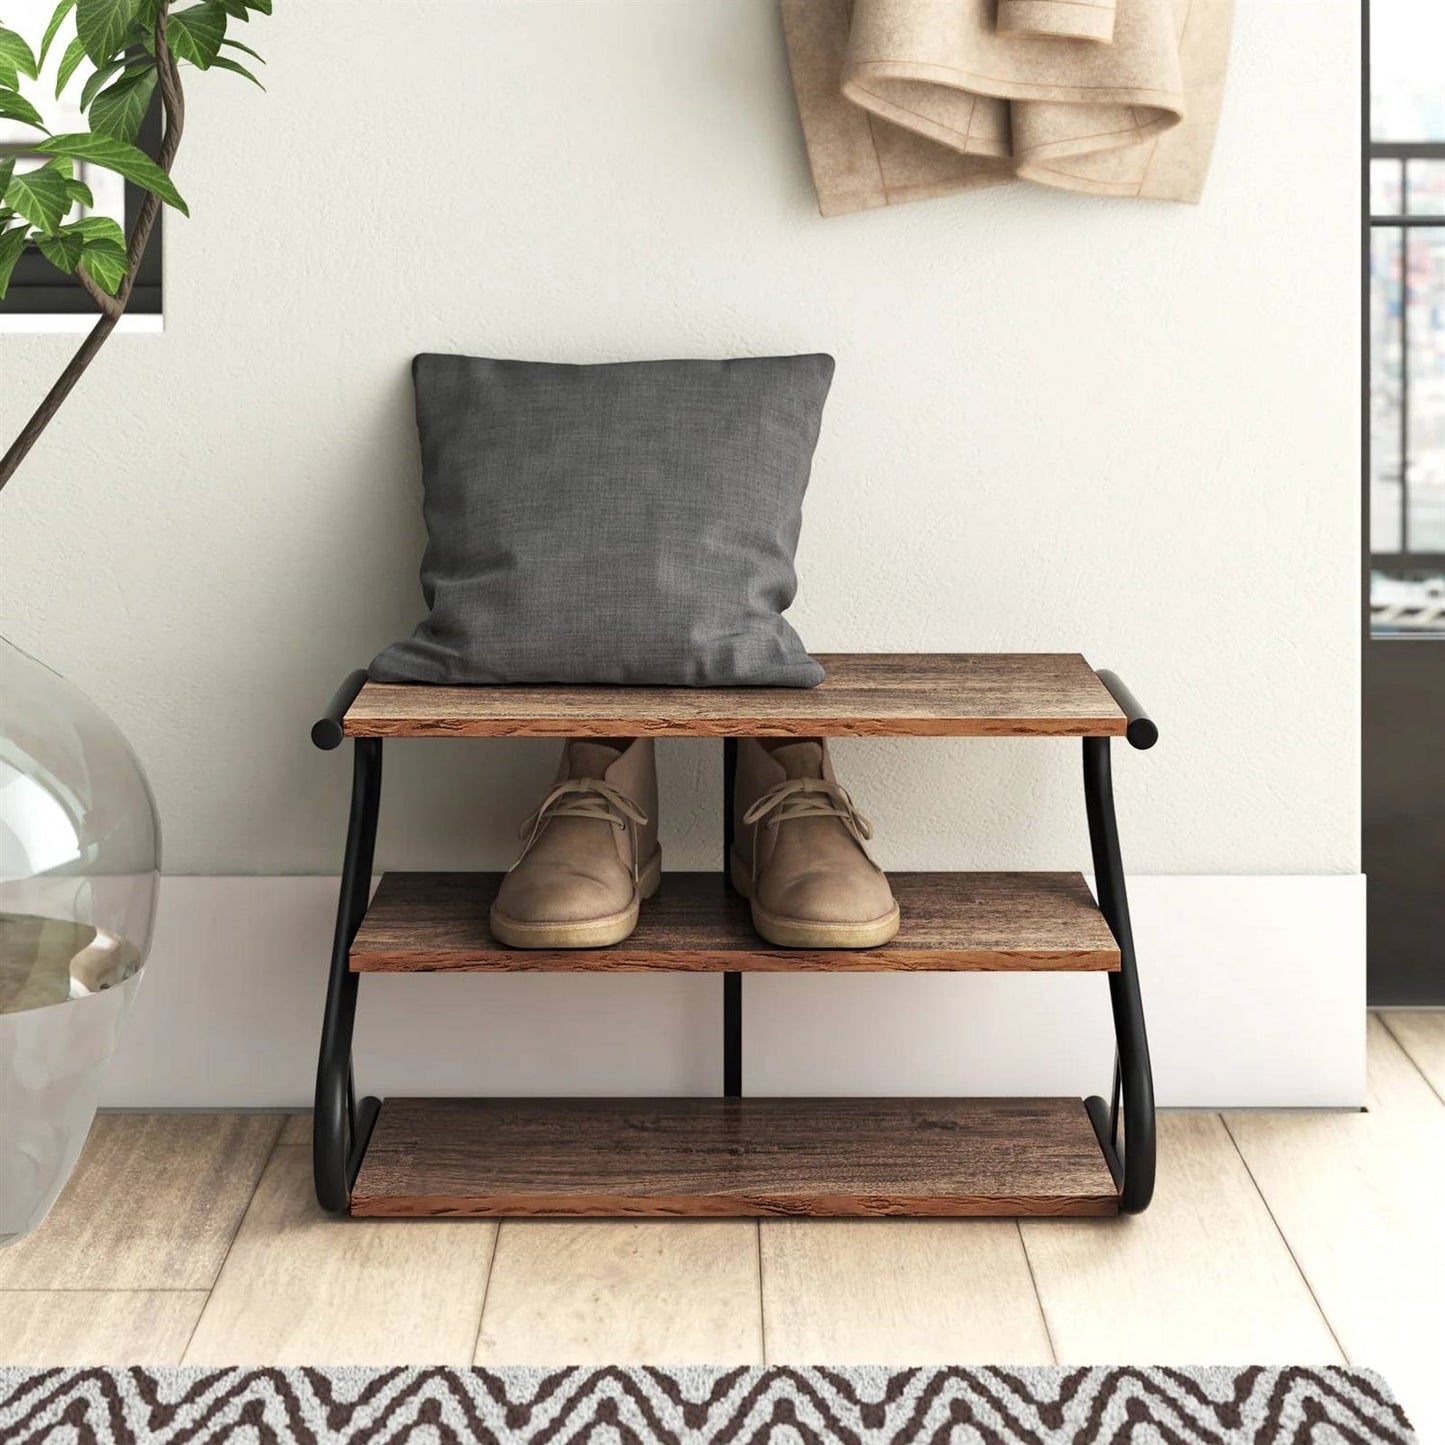 Accents > Shoe Racks - Modern Industrial Metal Wood 3-Tier Shoe Rack - Holds Up To 9 Pair Of Shoes